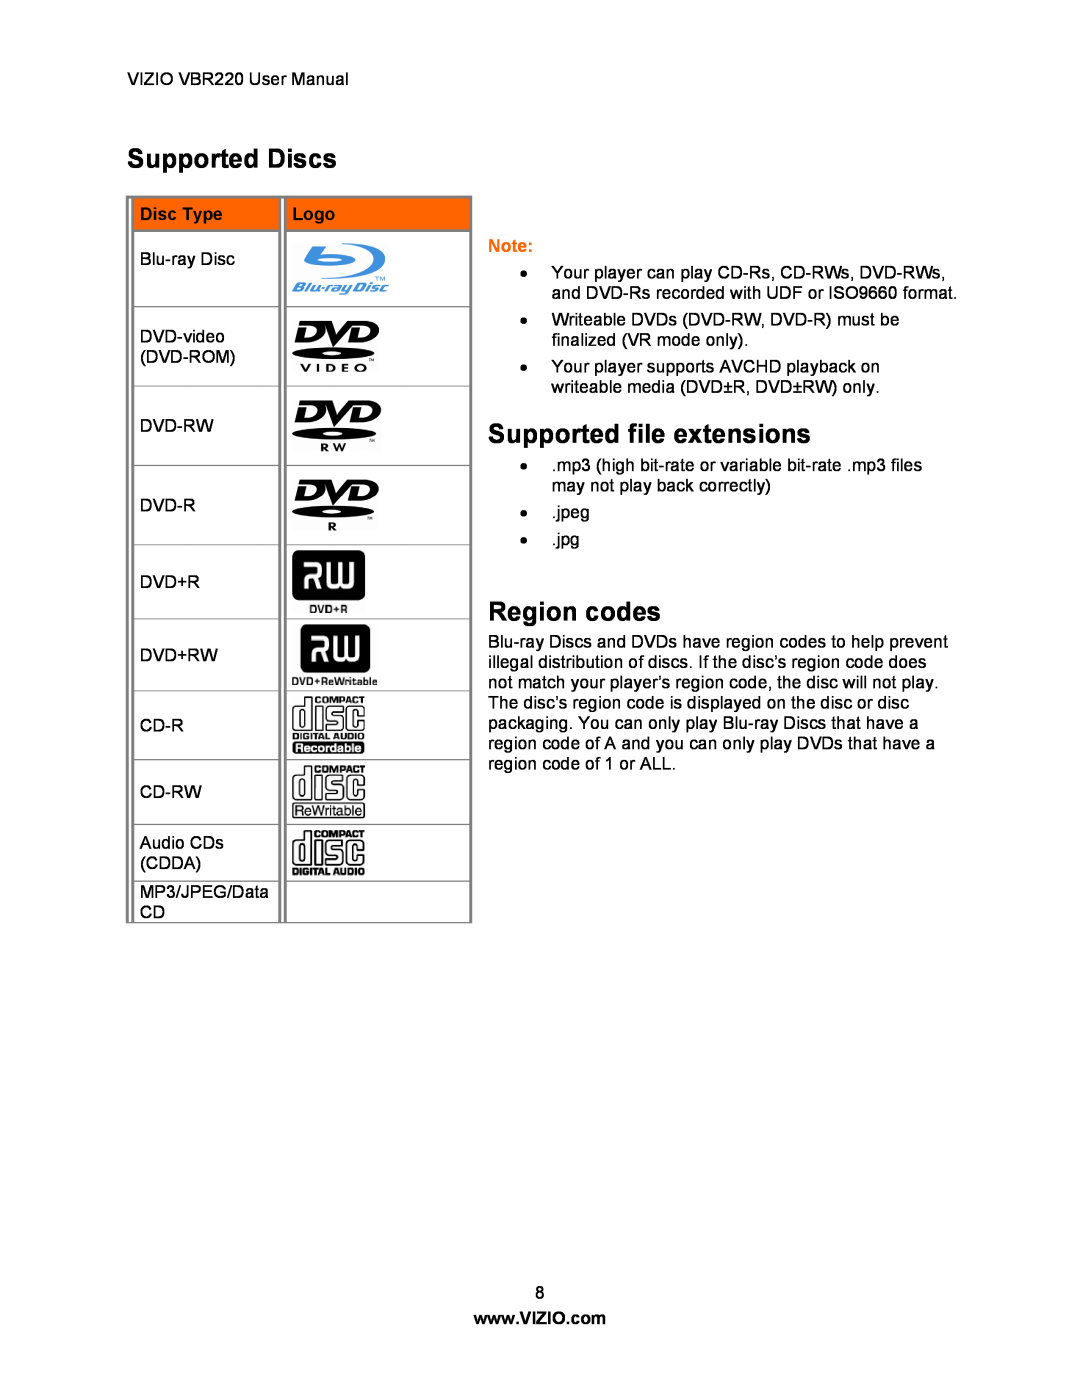 Panasonic VBR220 user manual Supported Discs, Supported file extensions, Region codes, Disc Type, Logo 